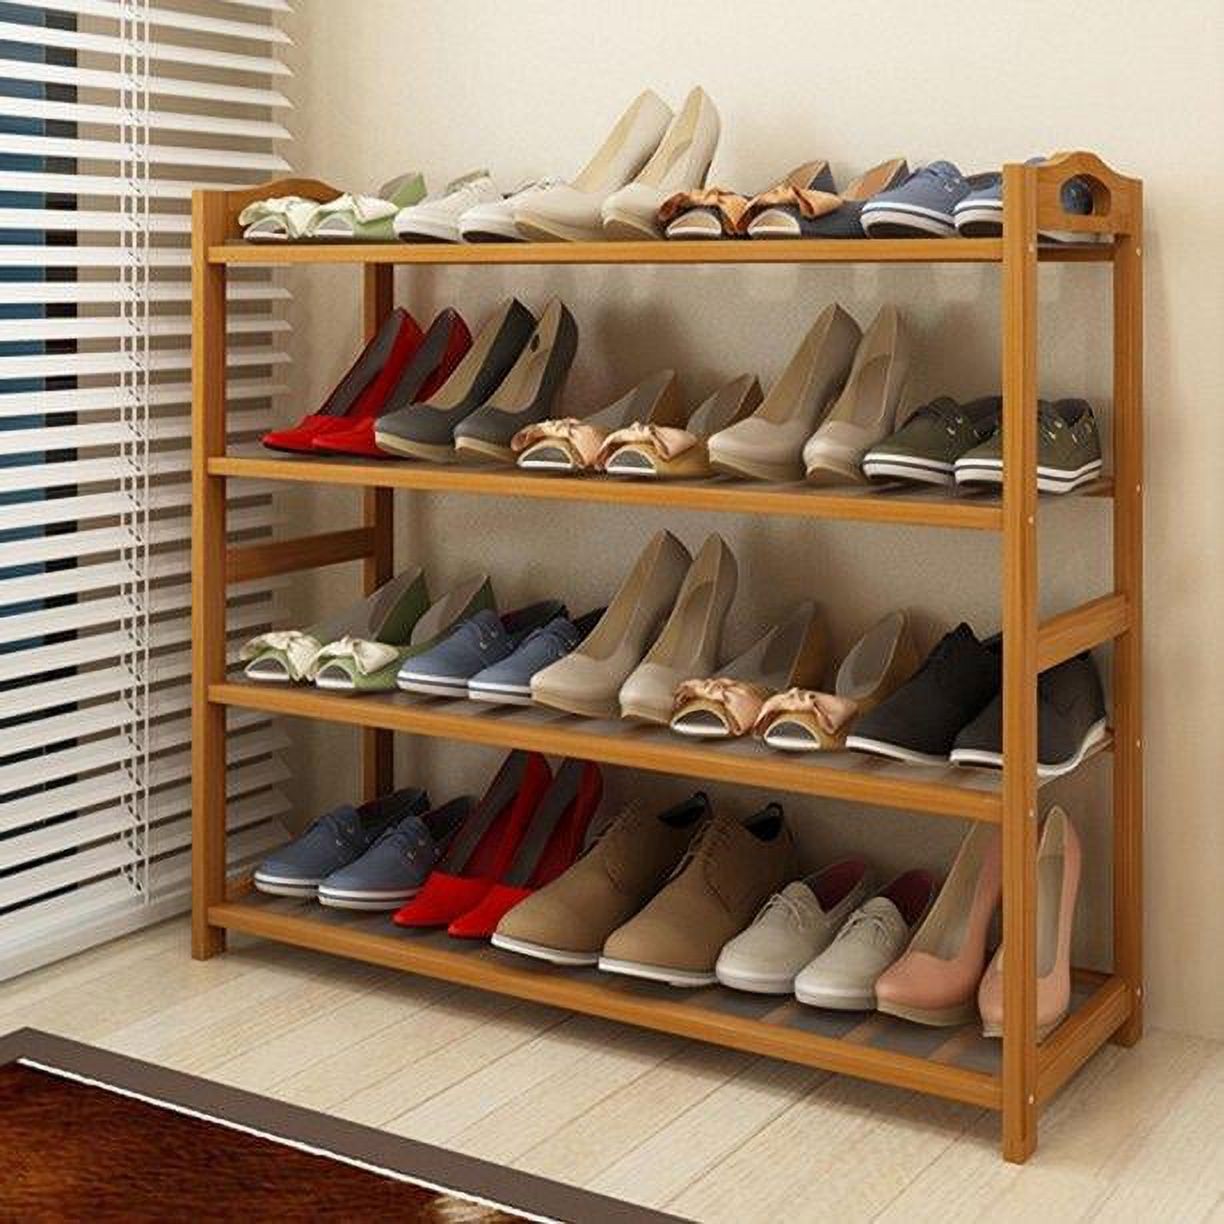 Zimtown Bamboo Wood Shoe Rack 4-Tier Pairs Entryway Shoe Shelf Tower Shoe Storage Organizer for Hallway Living Room Closet, Natural Finish - image 1 of 9